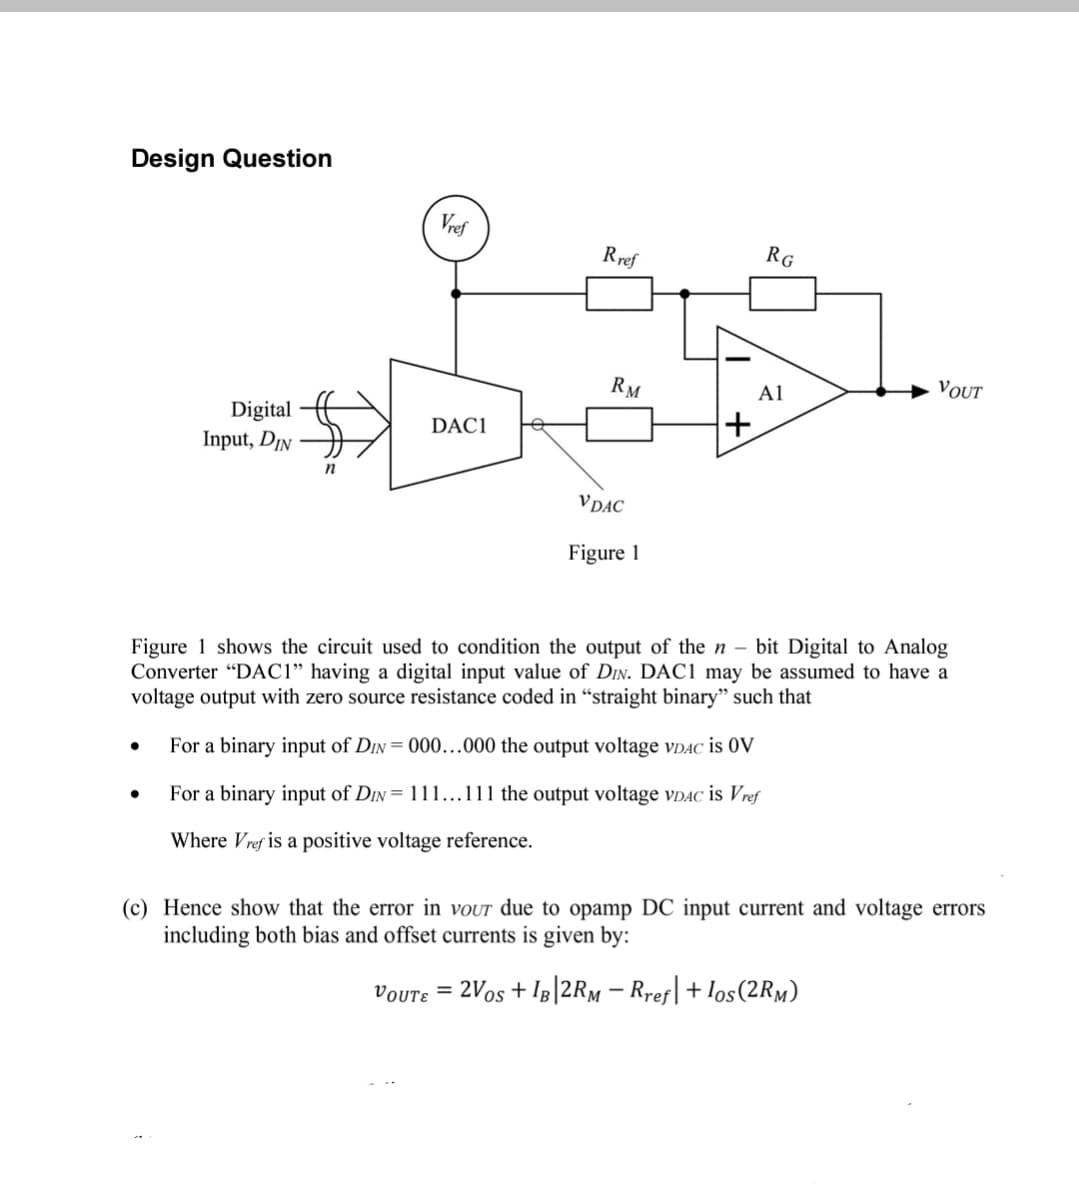 Design Question
Vref
Rref
RG
RM
A1
VOUT
Digital
DAC1
Input, DIN H
n
VDAC
Figure 1
Figure 1 shows the circuit used to condition the output of the n – bit Digital to Analog
Converter “DAC1" having a digital input value of Din. DAC1 may be assumed to have a
voltage output with zero source resistance coded in “straight binary" such that
For a binary input of DIN = 000...000 the output voltage VDAC is 0V
For a binary input of Din= 111...111 the output voltage vDAC is Vref
Where Vref is a positive voltage reference.
(c) Hence show that the error in vour due to opamp DC input current and voltage errors
including both bias and offset currents is given by:
voute = 2Vos + IB|2RM – Rref|+Ios(2RM)
%3D
